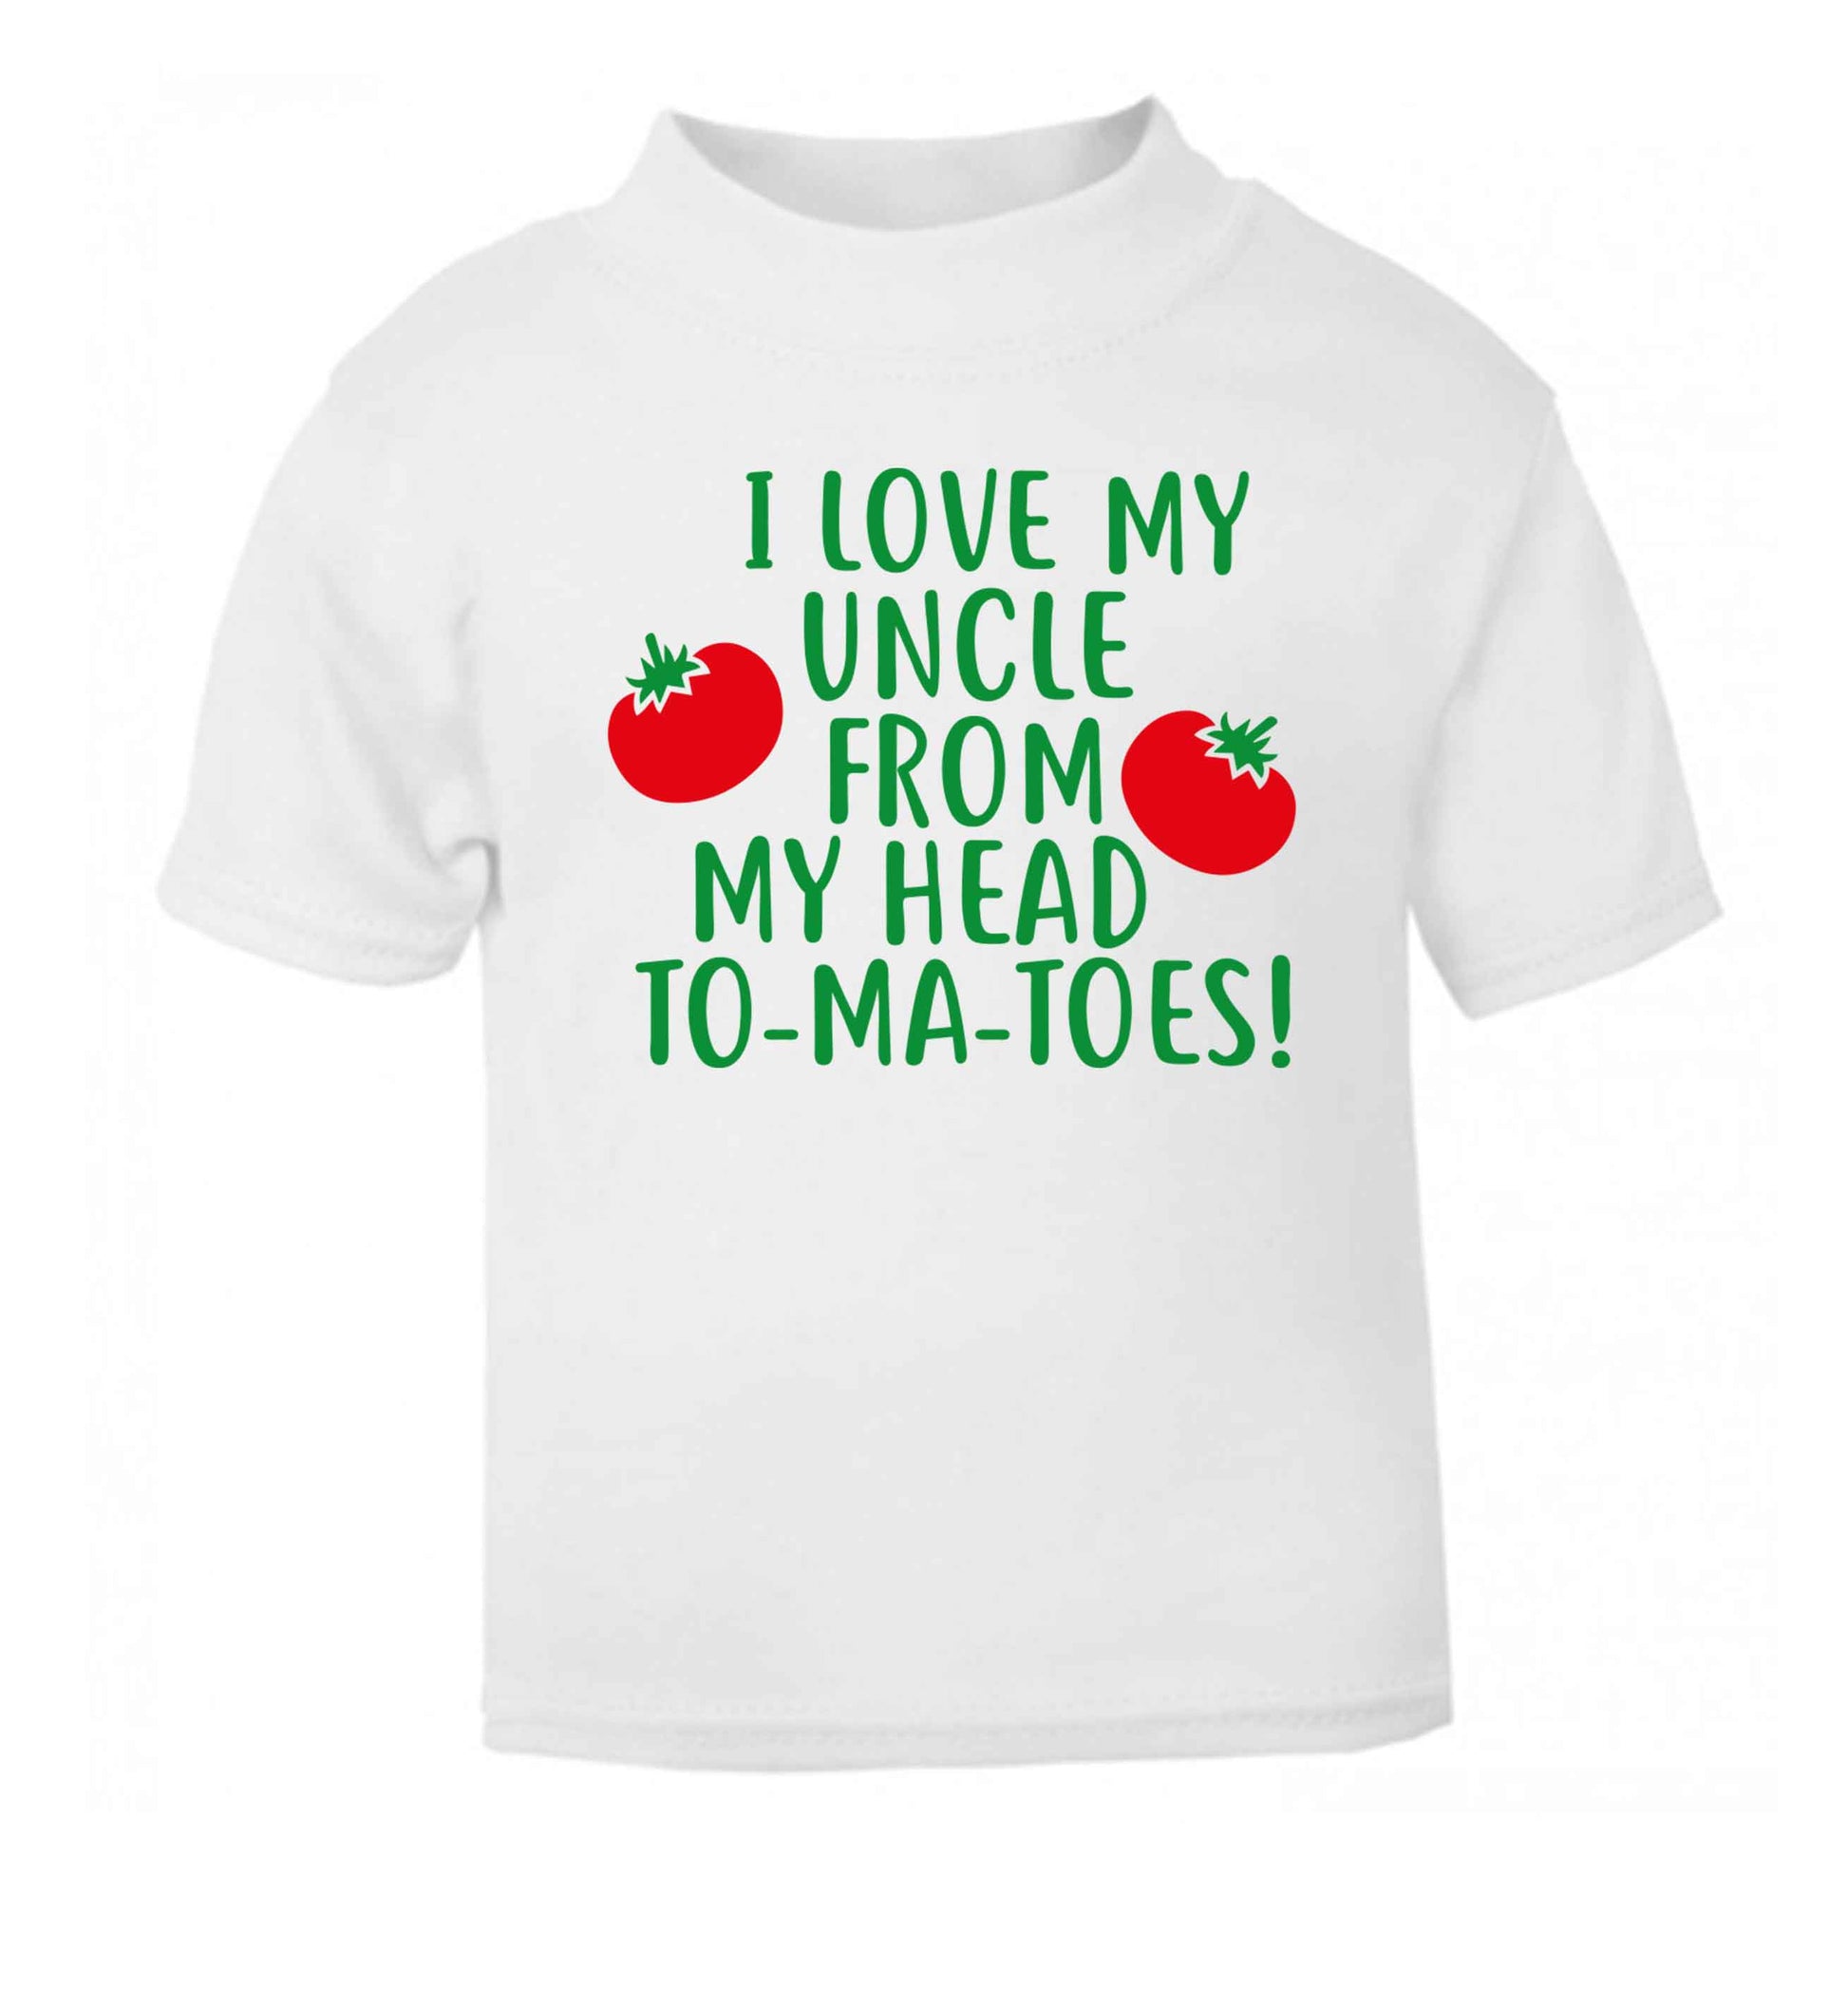 I love my uncle from my head To-Ma-Toes white Baby Toddler Tshirt 2 Years